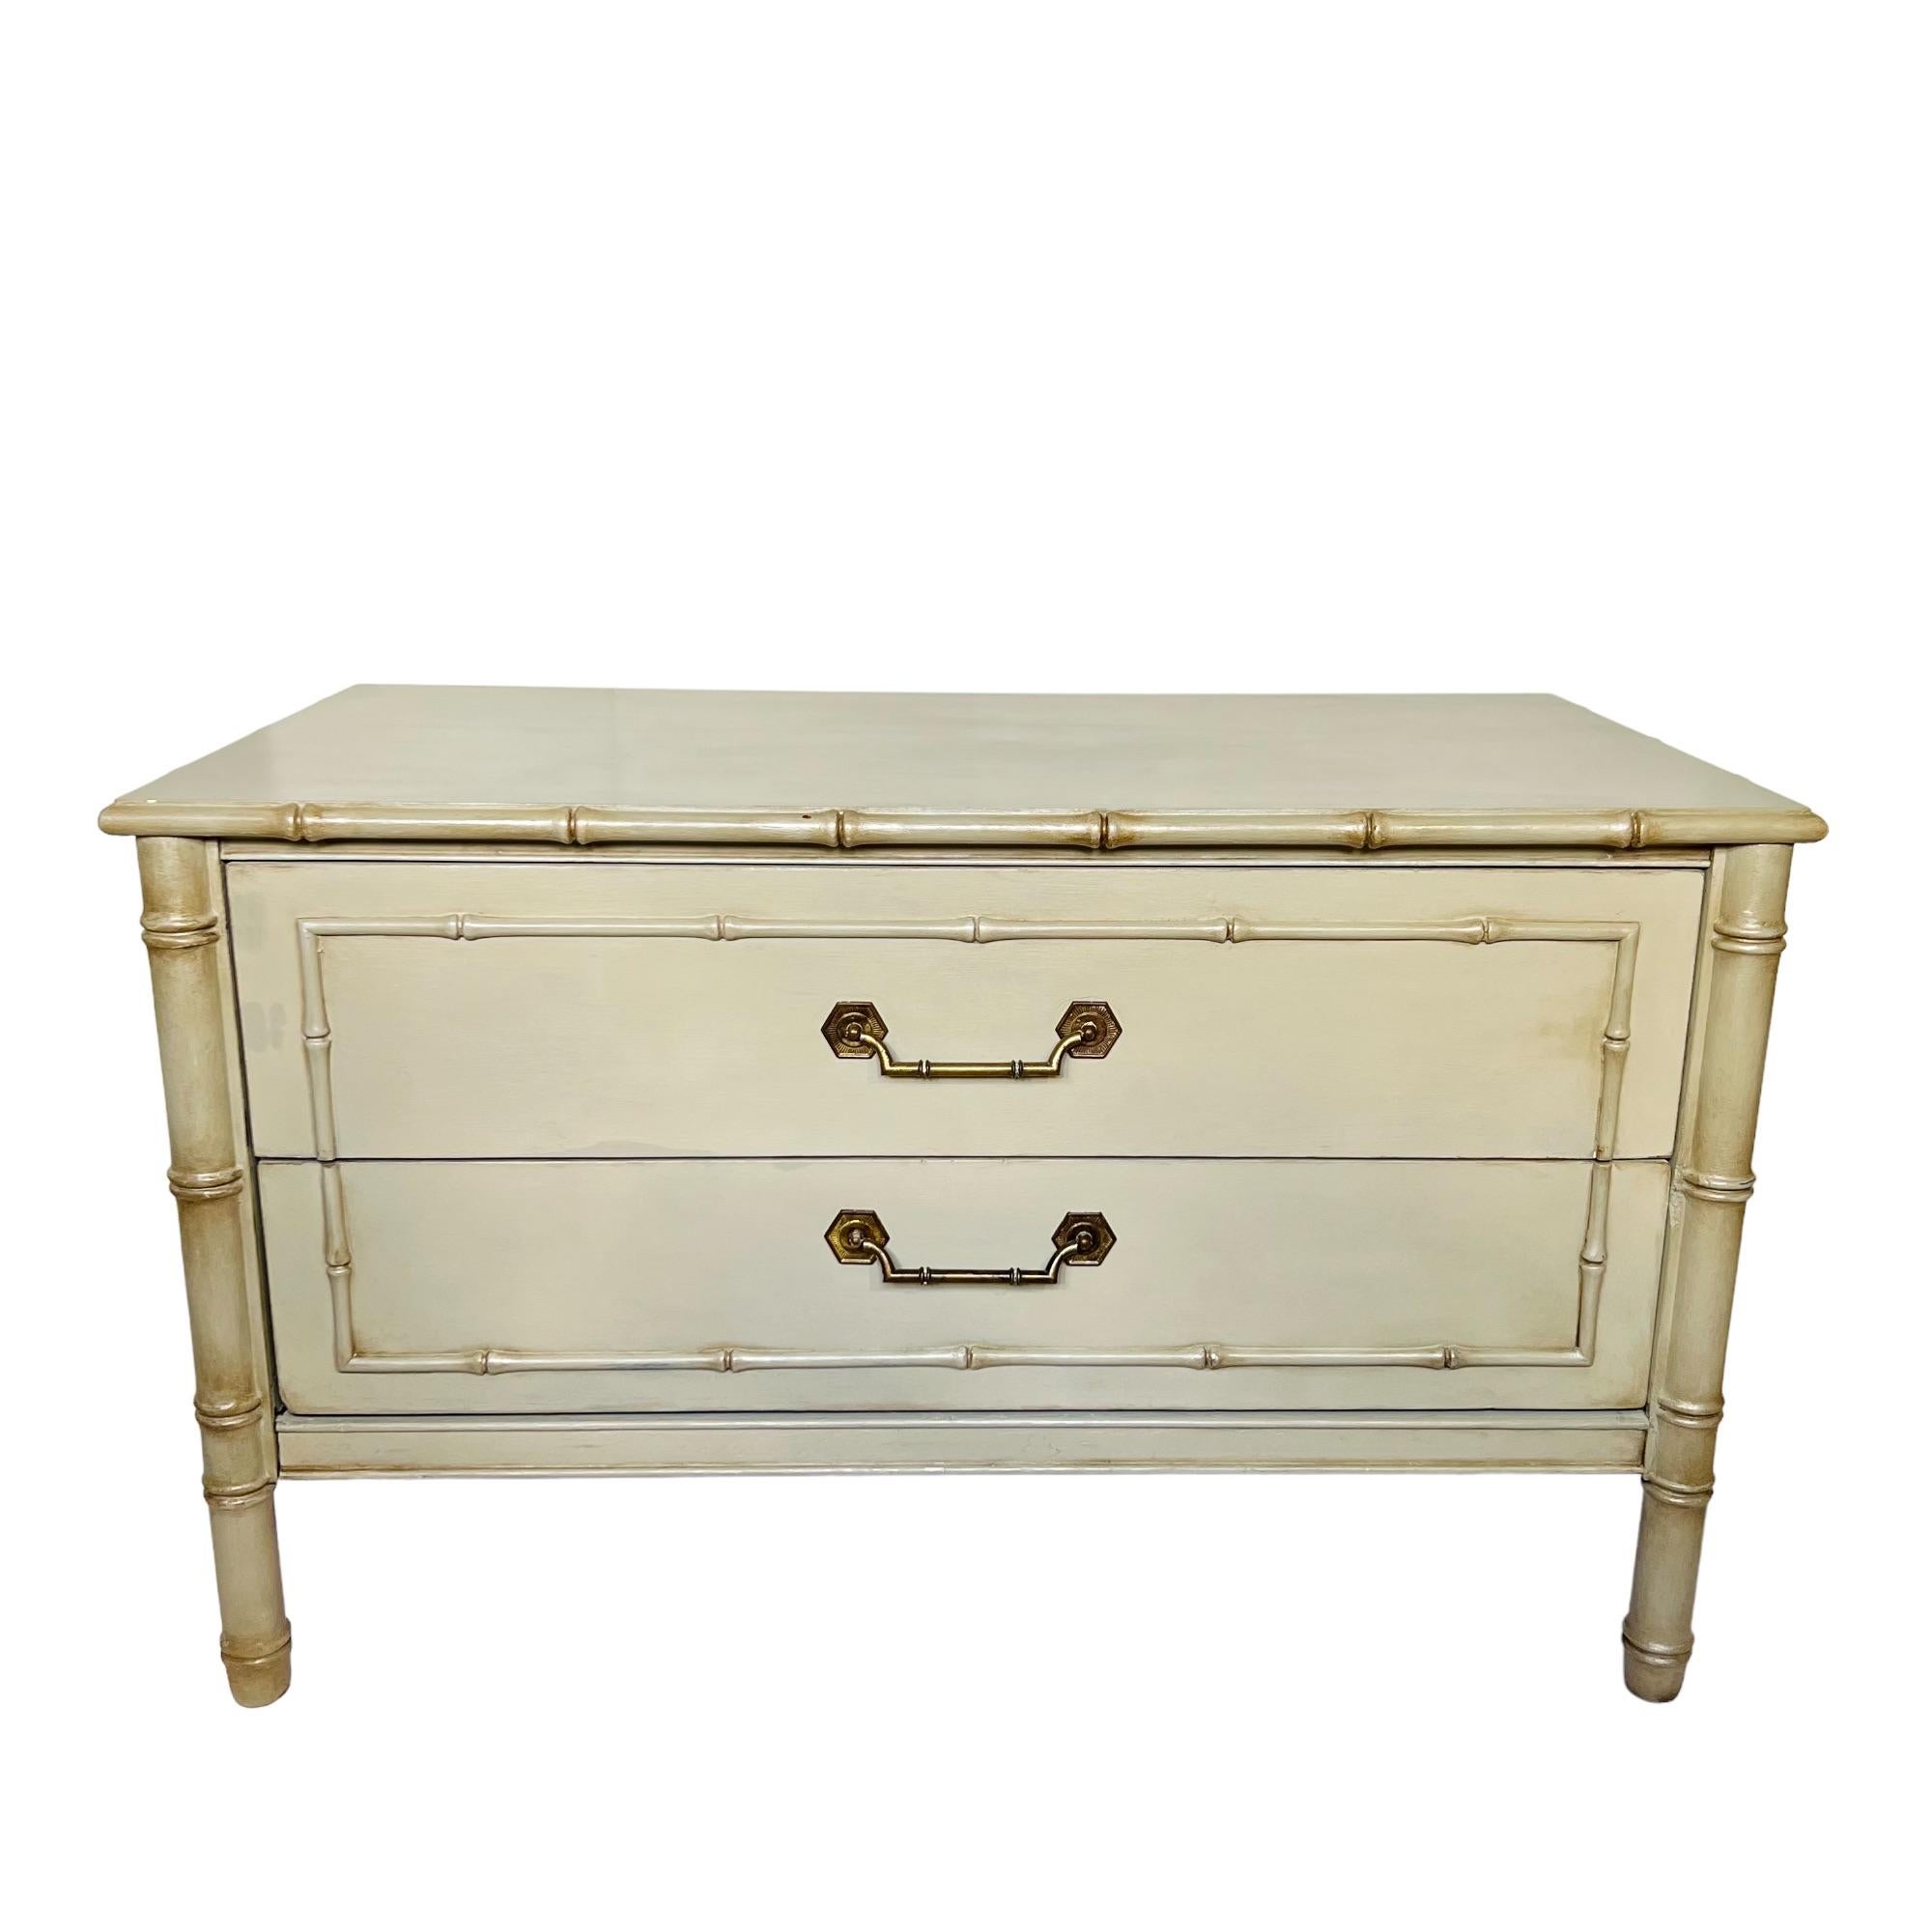 This vintage Thomasville Palm Beach Regency faux bamboo chest of drawers has been custom refinished in satin light grayish green with pearlescent highlights and dark wax details. It features two drawers adorned with brass handles and lined in gray